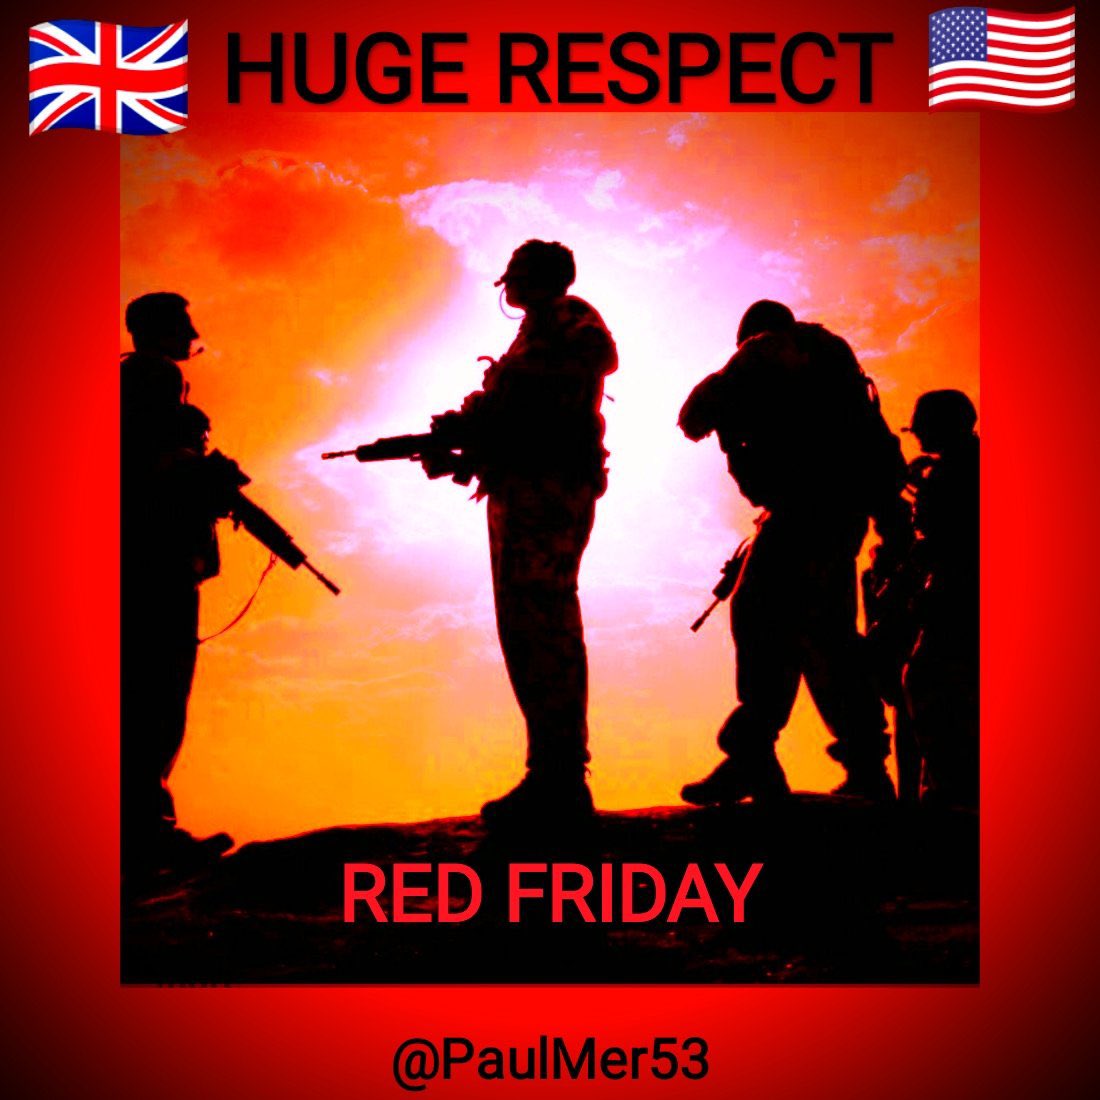 My First chance of the year to say have a Happy Red Friday 🇬🇧🇺🇸🇬🇧🇺🇸 We wear the Red out of Respect. Until all our Troops both home and abroad are back safely. Also Remembering All those who have payed the ultimate Sacrifice 🇺🇸🇬🇧🇺🇸🇬🇧 @PaulMer53 🇬🇧🇺🇸👊👊🇺🇸🇬🇧